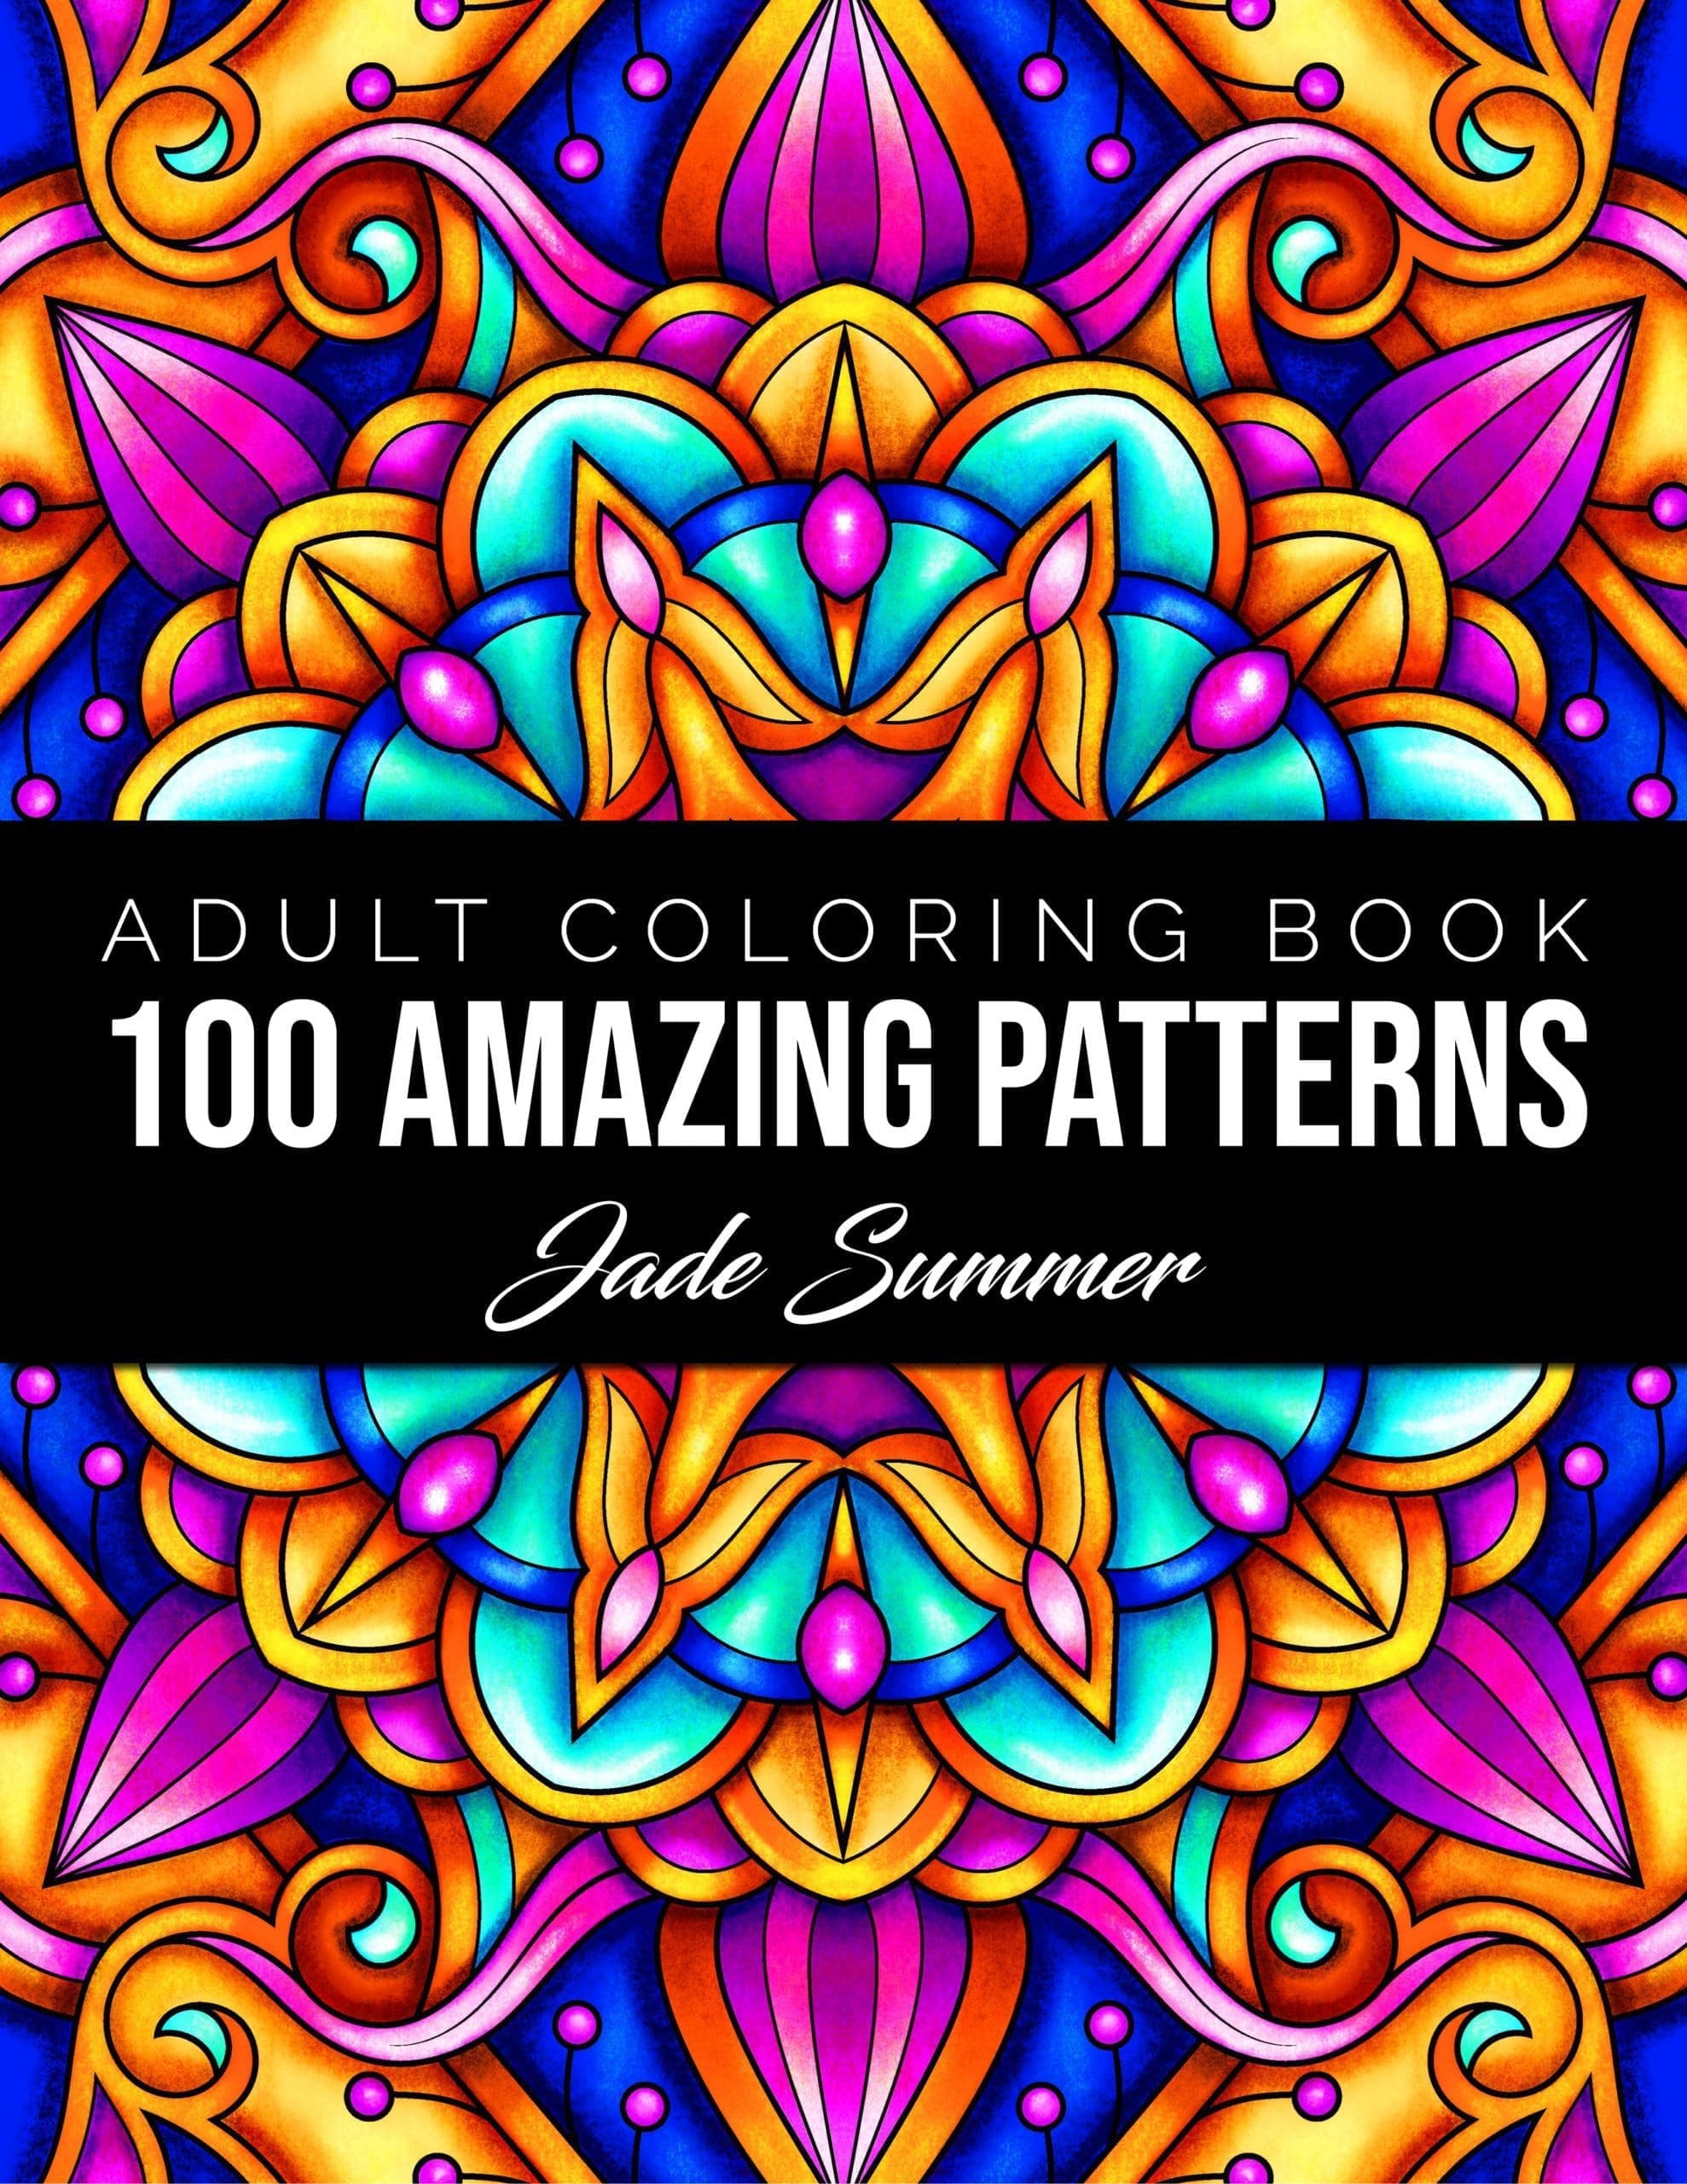 Fantastic Stained Glass Designs Coloring Book: Calming Coloring Books For  Adults Edition|Paperback